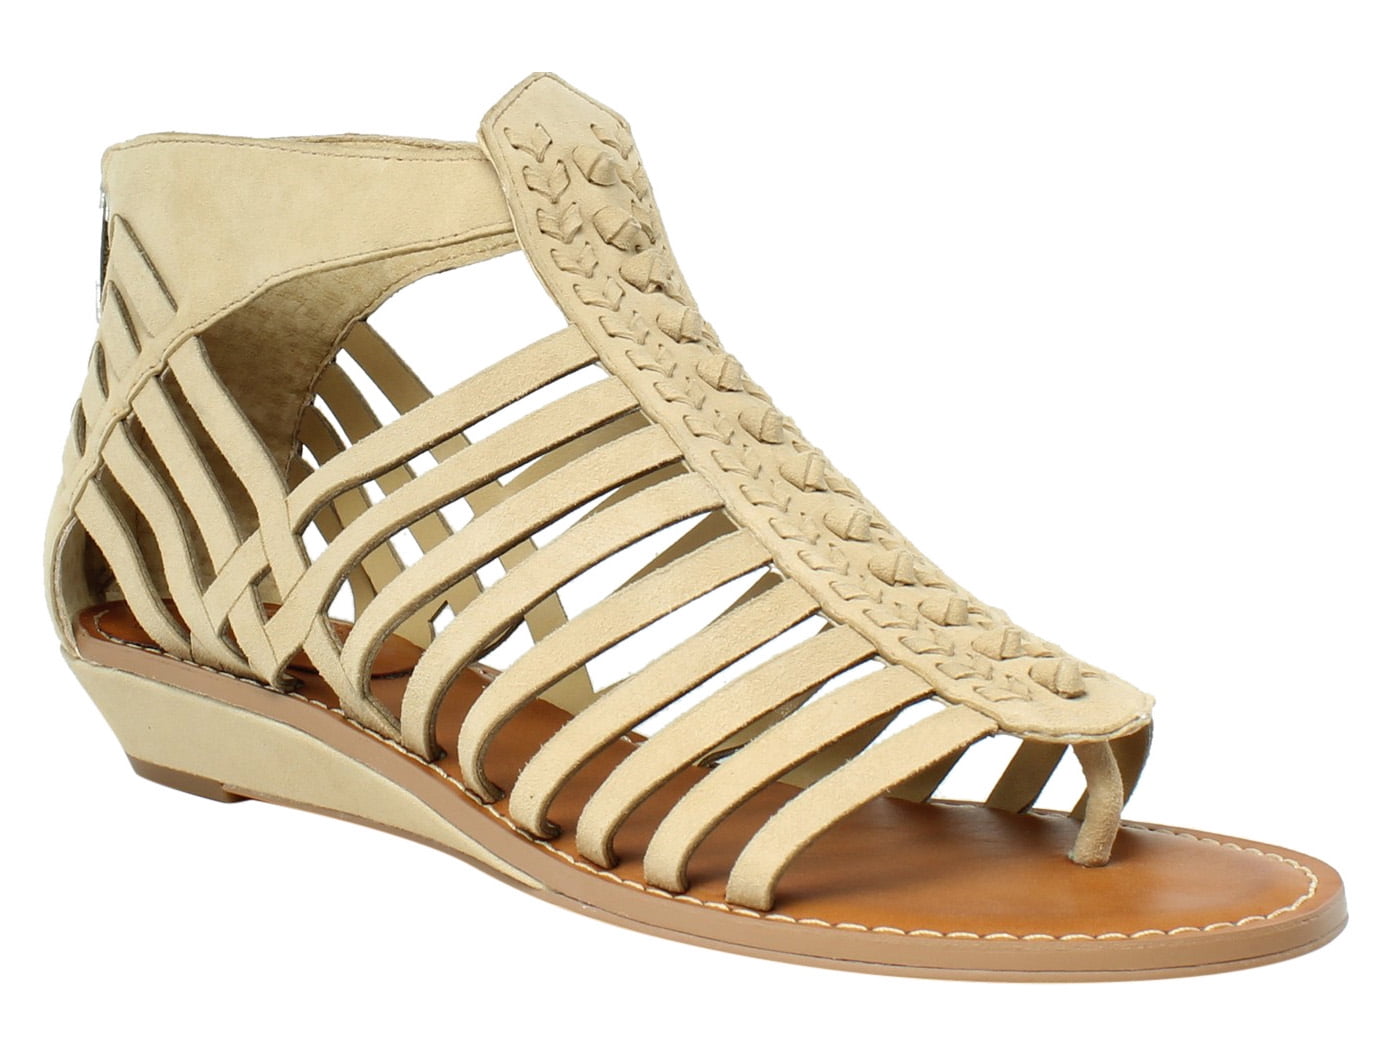 Vince Camuto - New Vince Camuto Womens Vc-Seanna Brown Gladiator ...